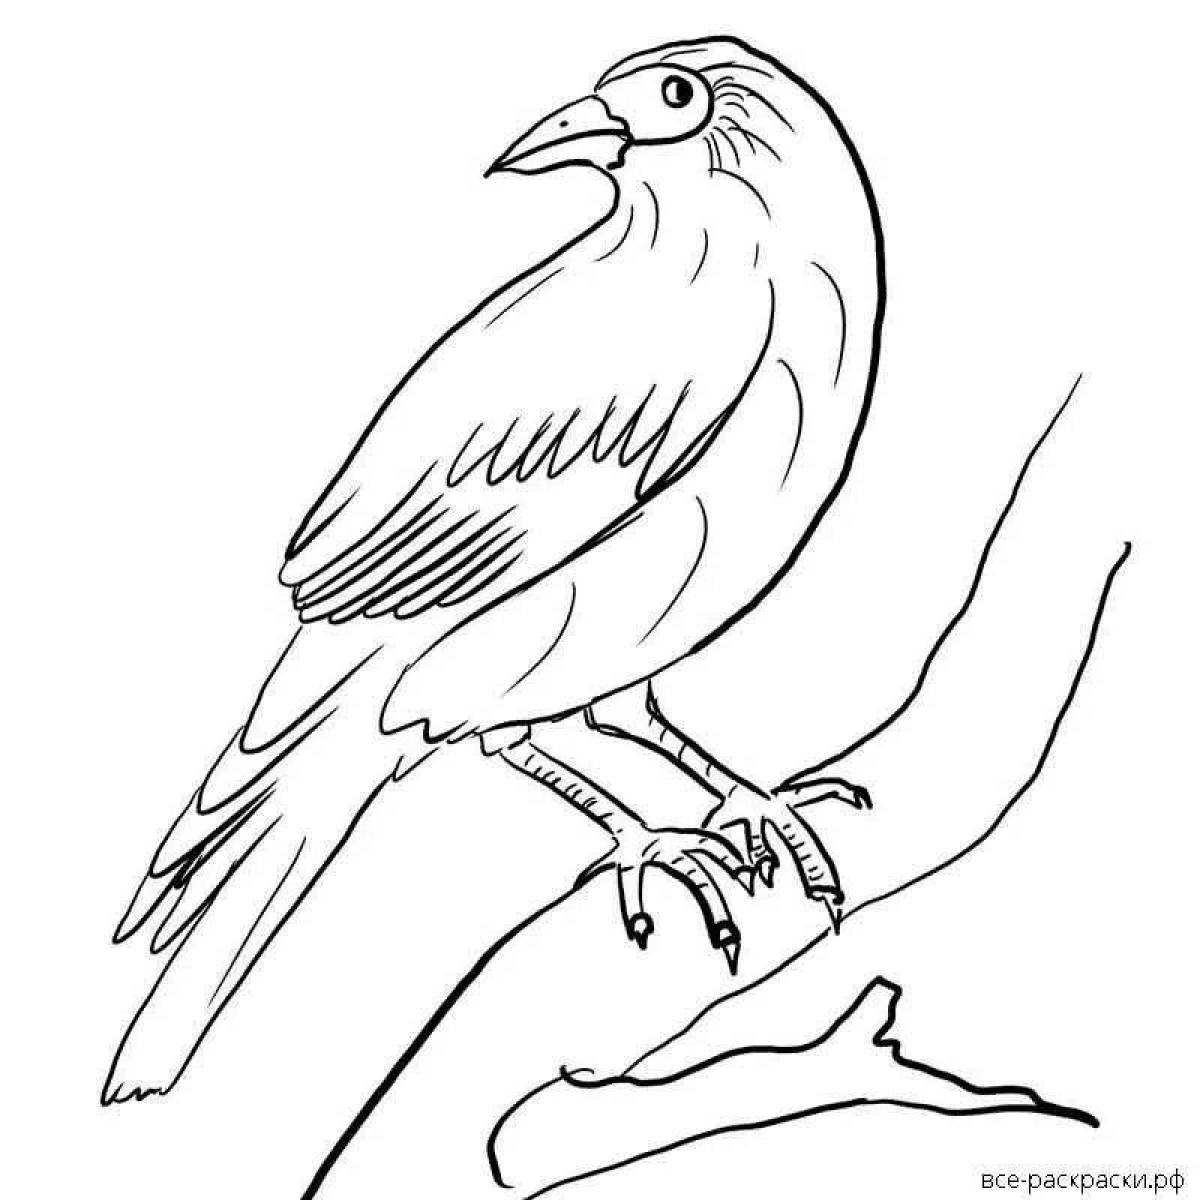 Dreamy crow coloring book for kids